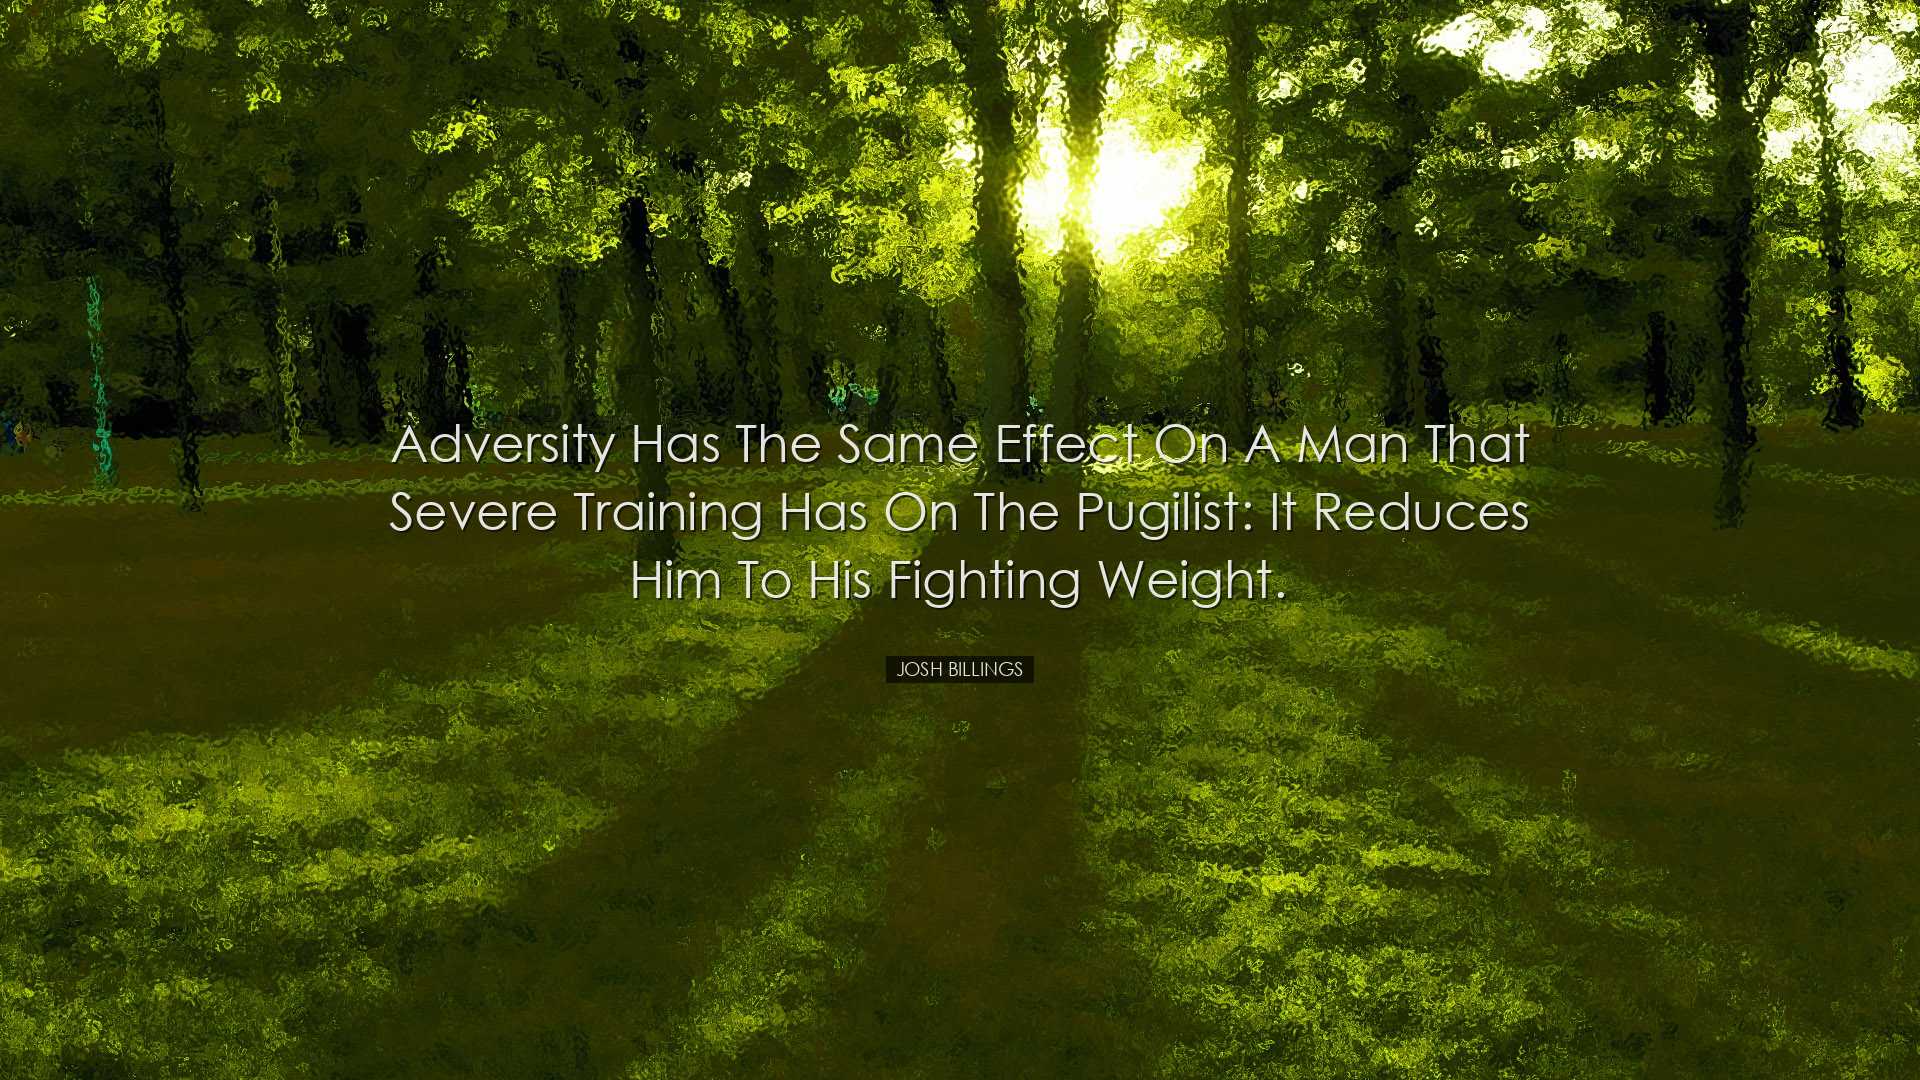 Adversity has the same effect on a man that severe training has on